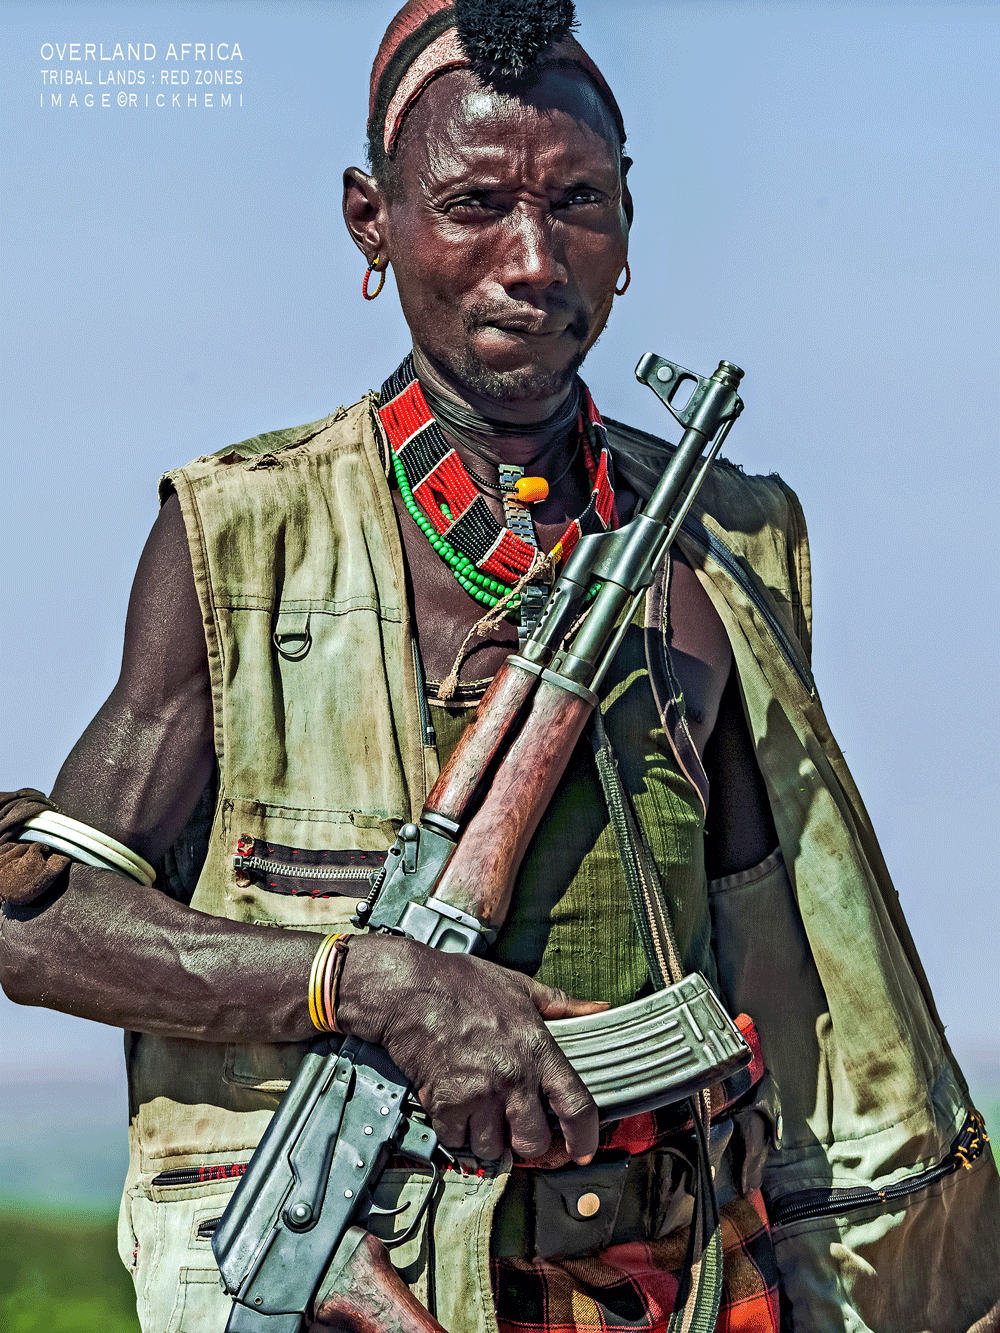 solo overland travel Africa, tribal lands, image by Rick Hemi